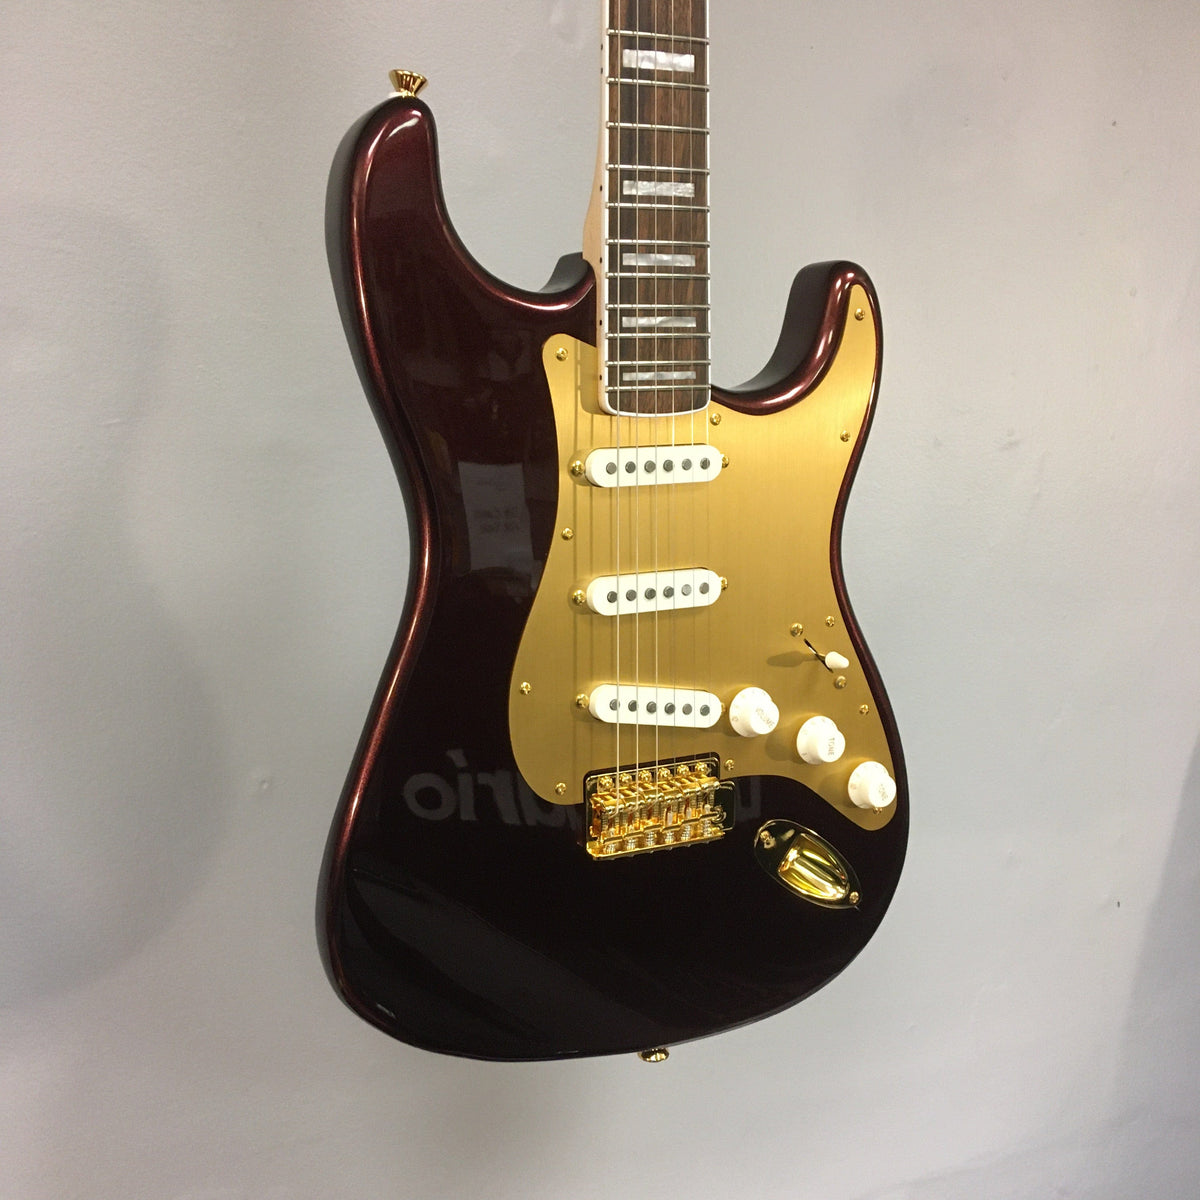 Squier 40th Anniversary Gold Edition Stratocaster Ruby Red Metallic Refurb